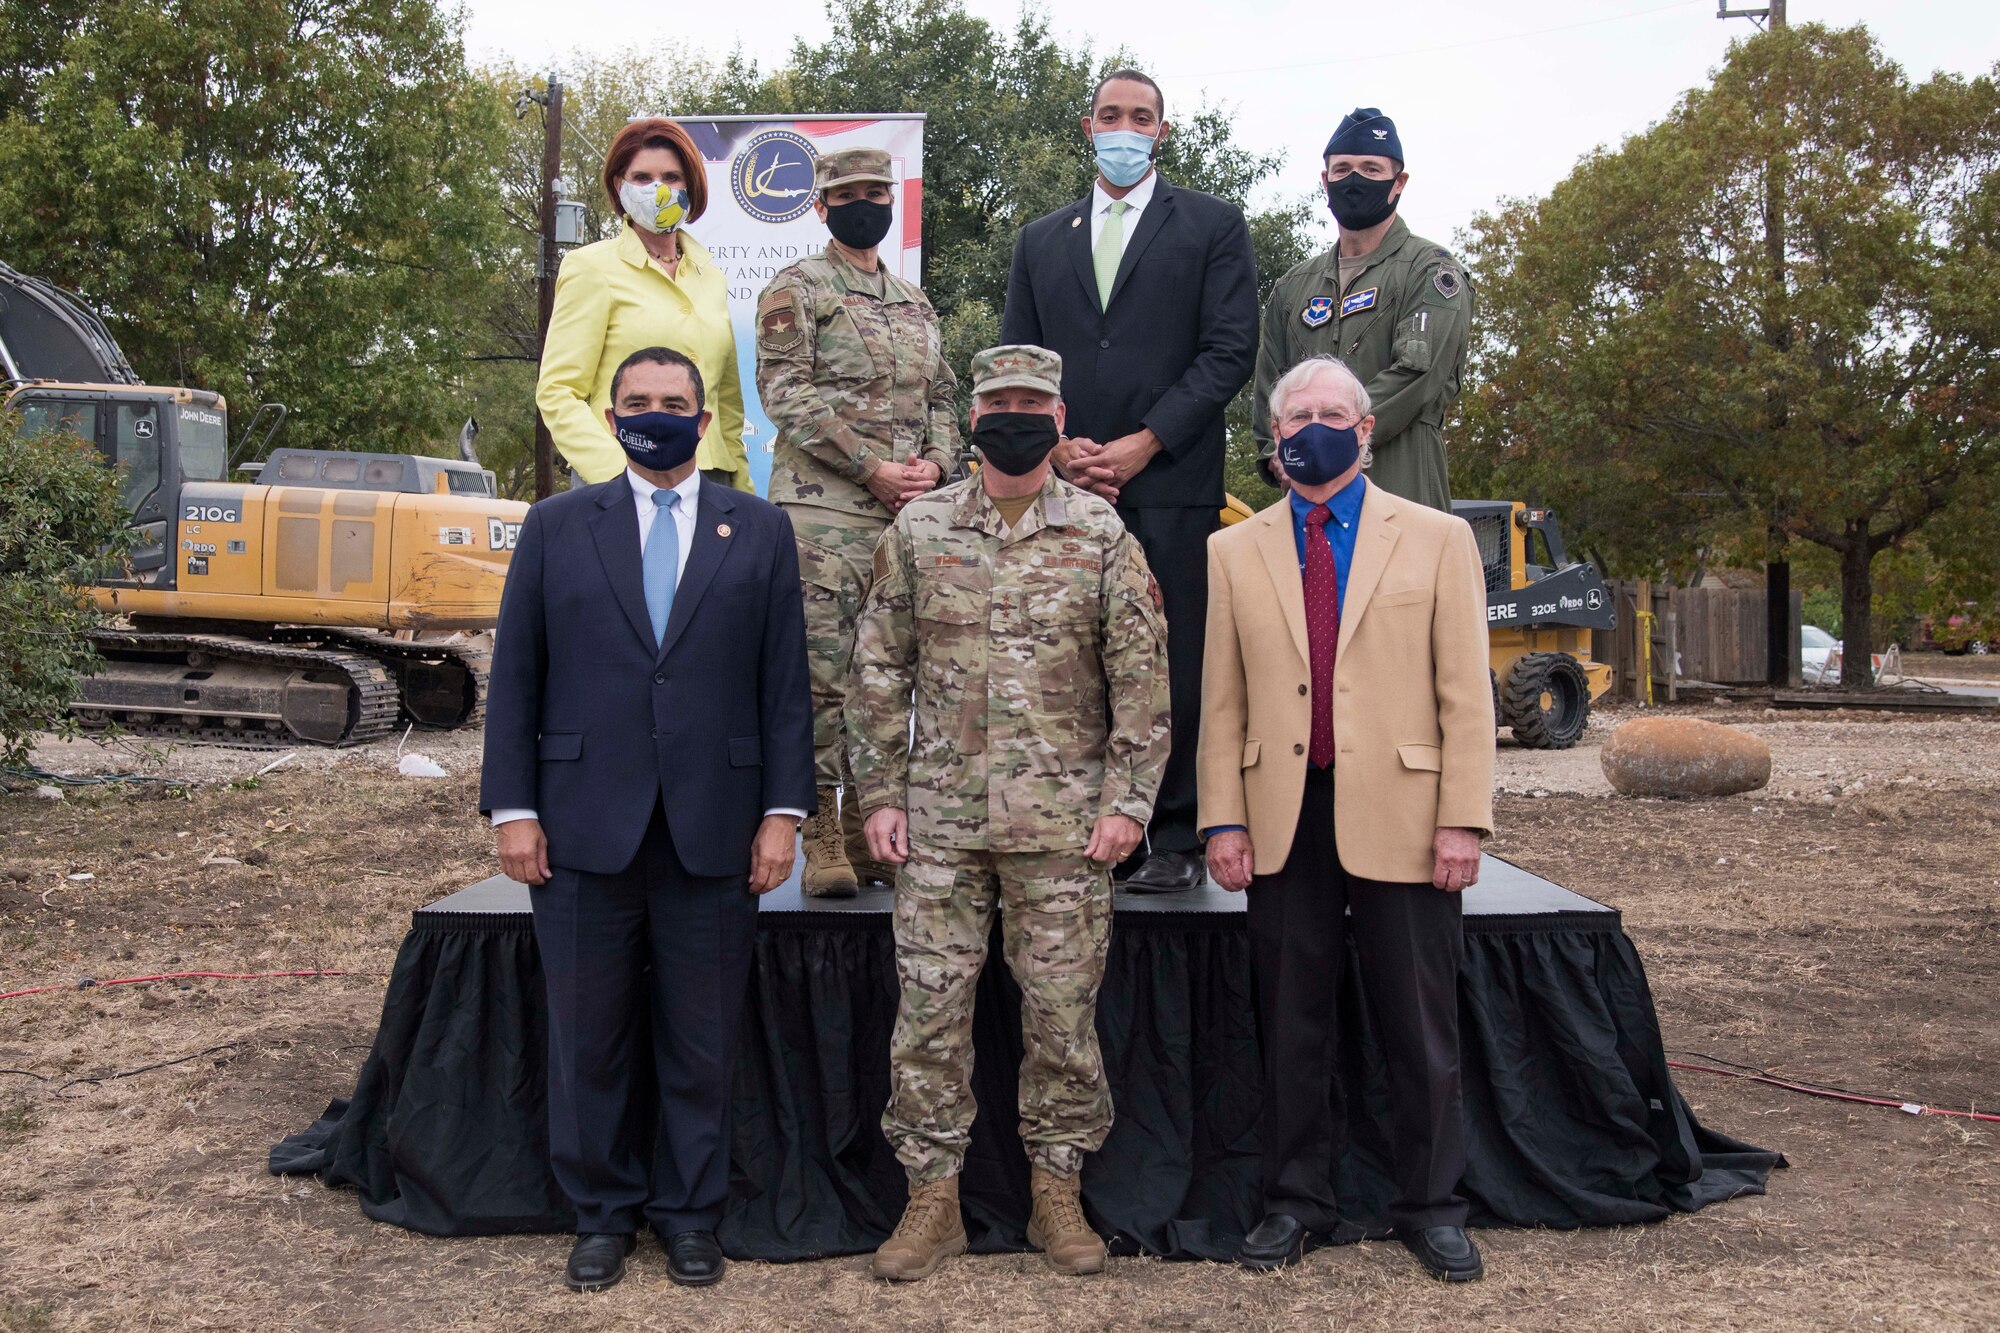 A group of people wearing masks, outdoors, in front of construction equipment.